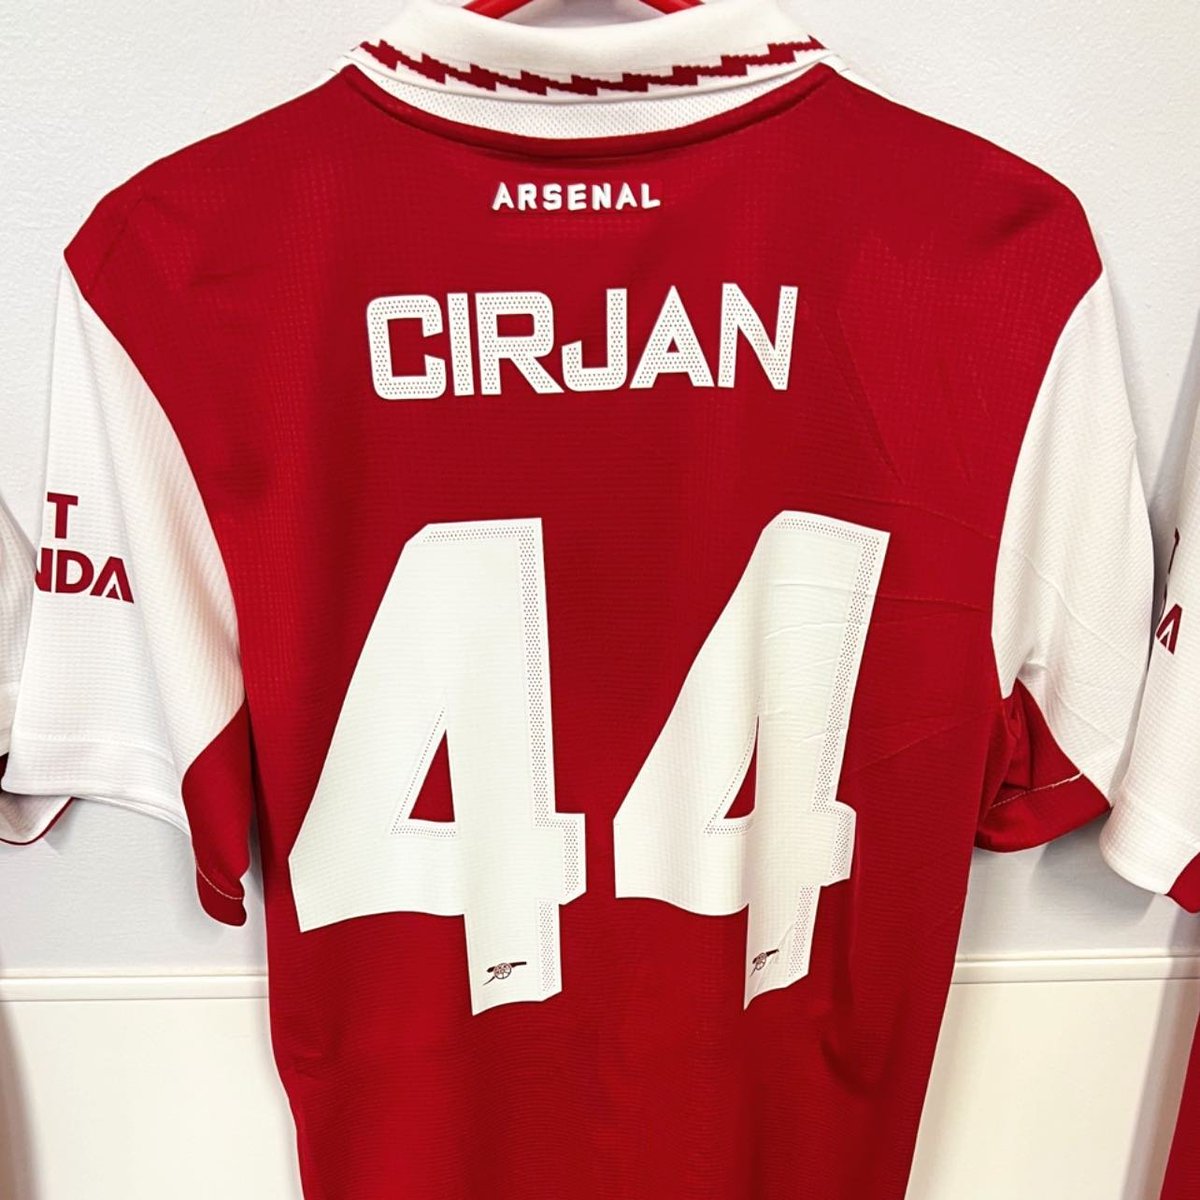 Catalin Cirjan 🇷🇴 (2002) back in an official game!

The attacking midfielder came on very late against Cambridge United in the EFL Cup. 2-0 win for the #Gunners U21 side. The first of many, hopefully!

#AFC #Arsenal #EFLTrophy